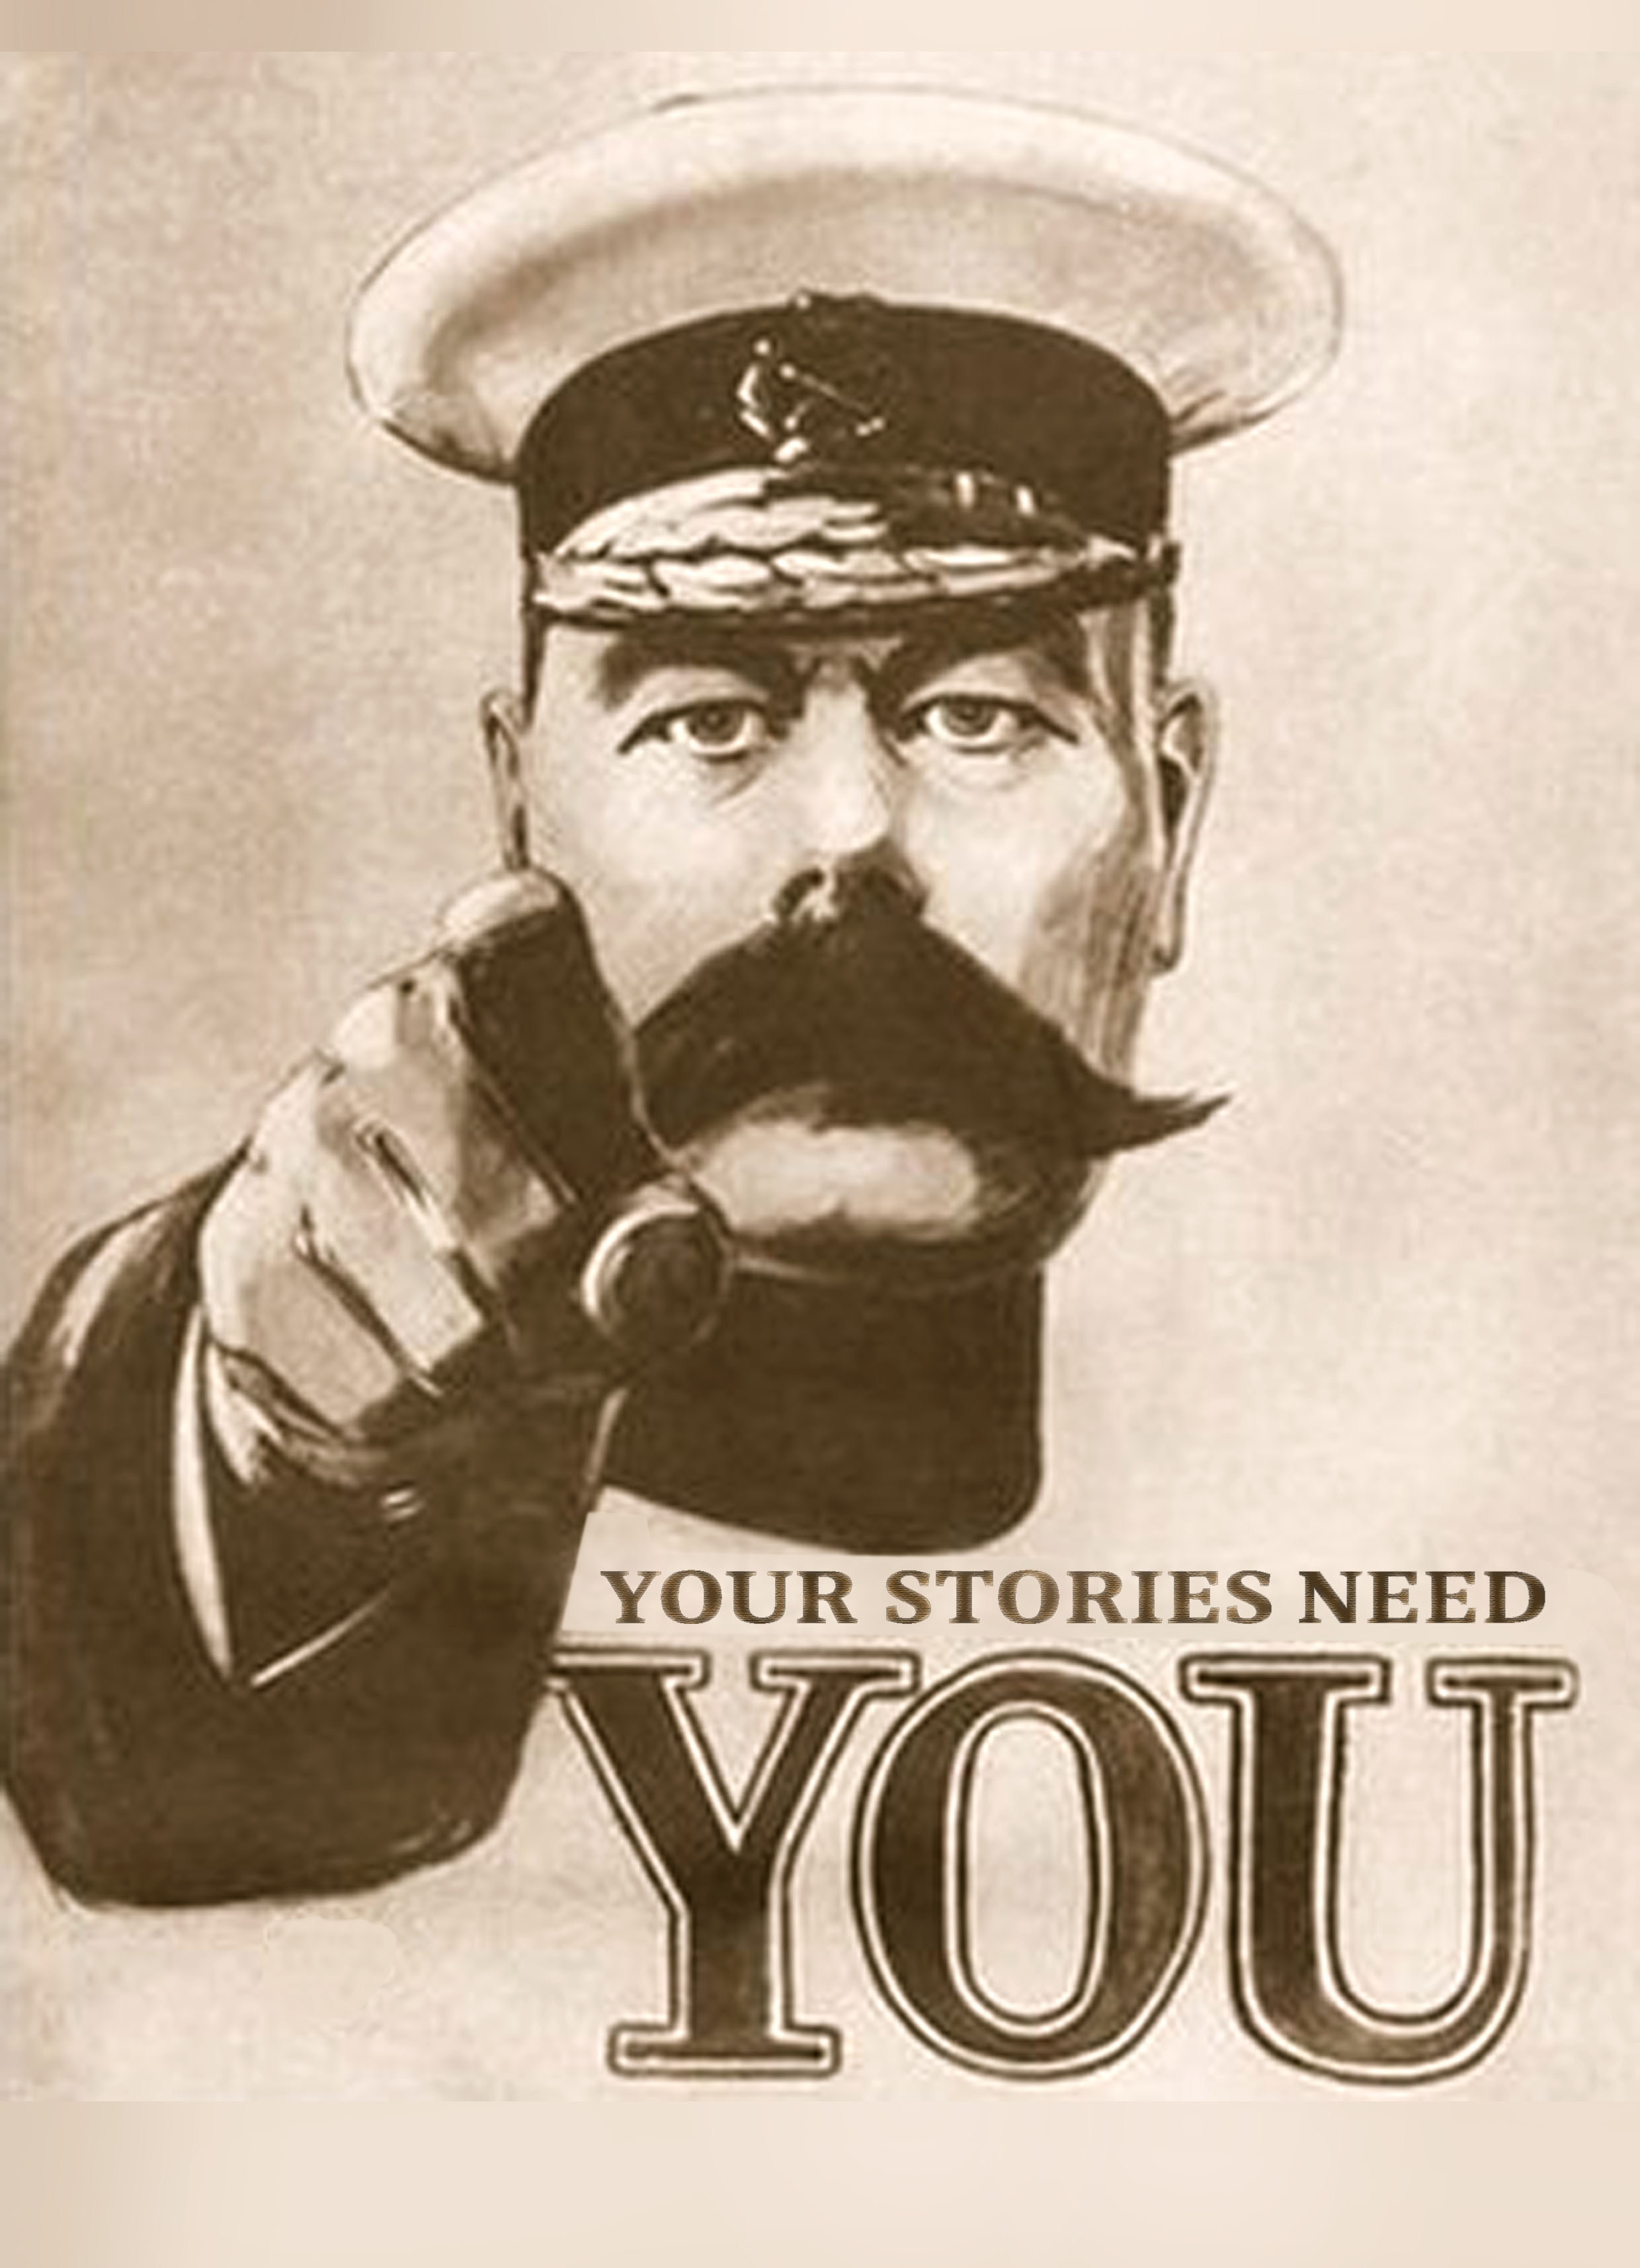 Your stories need you